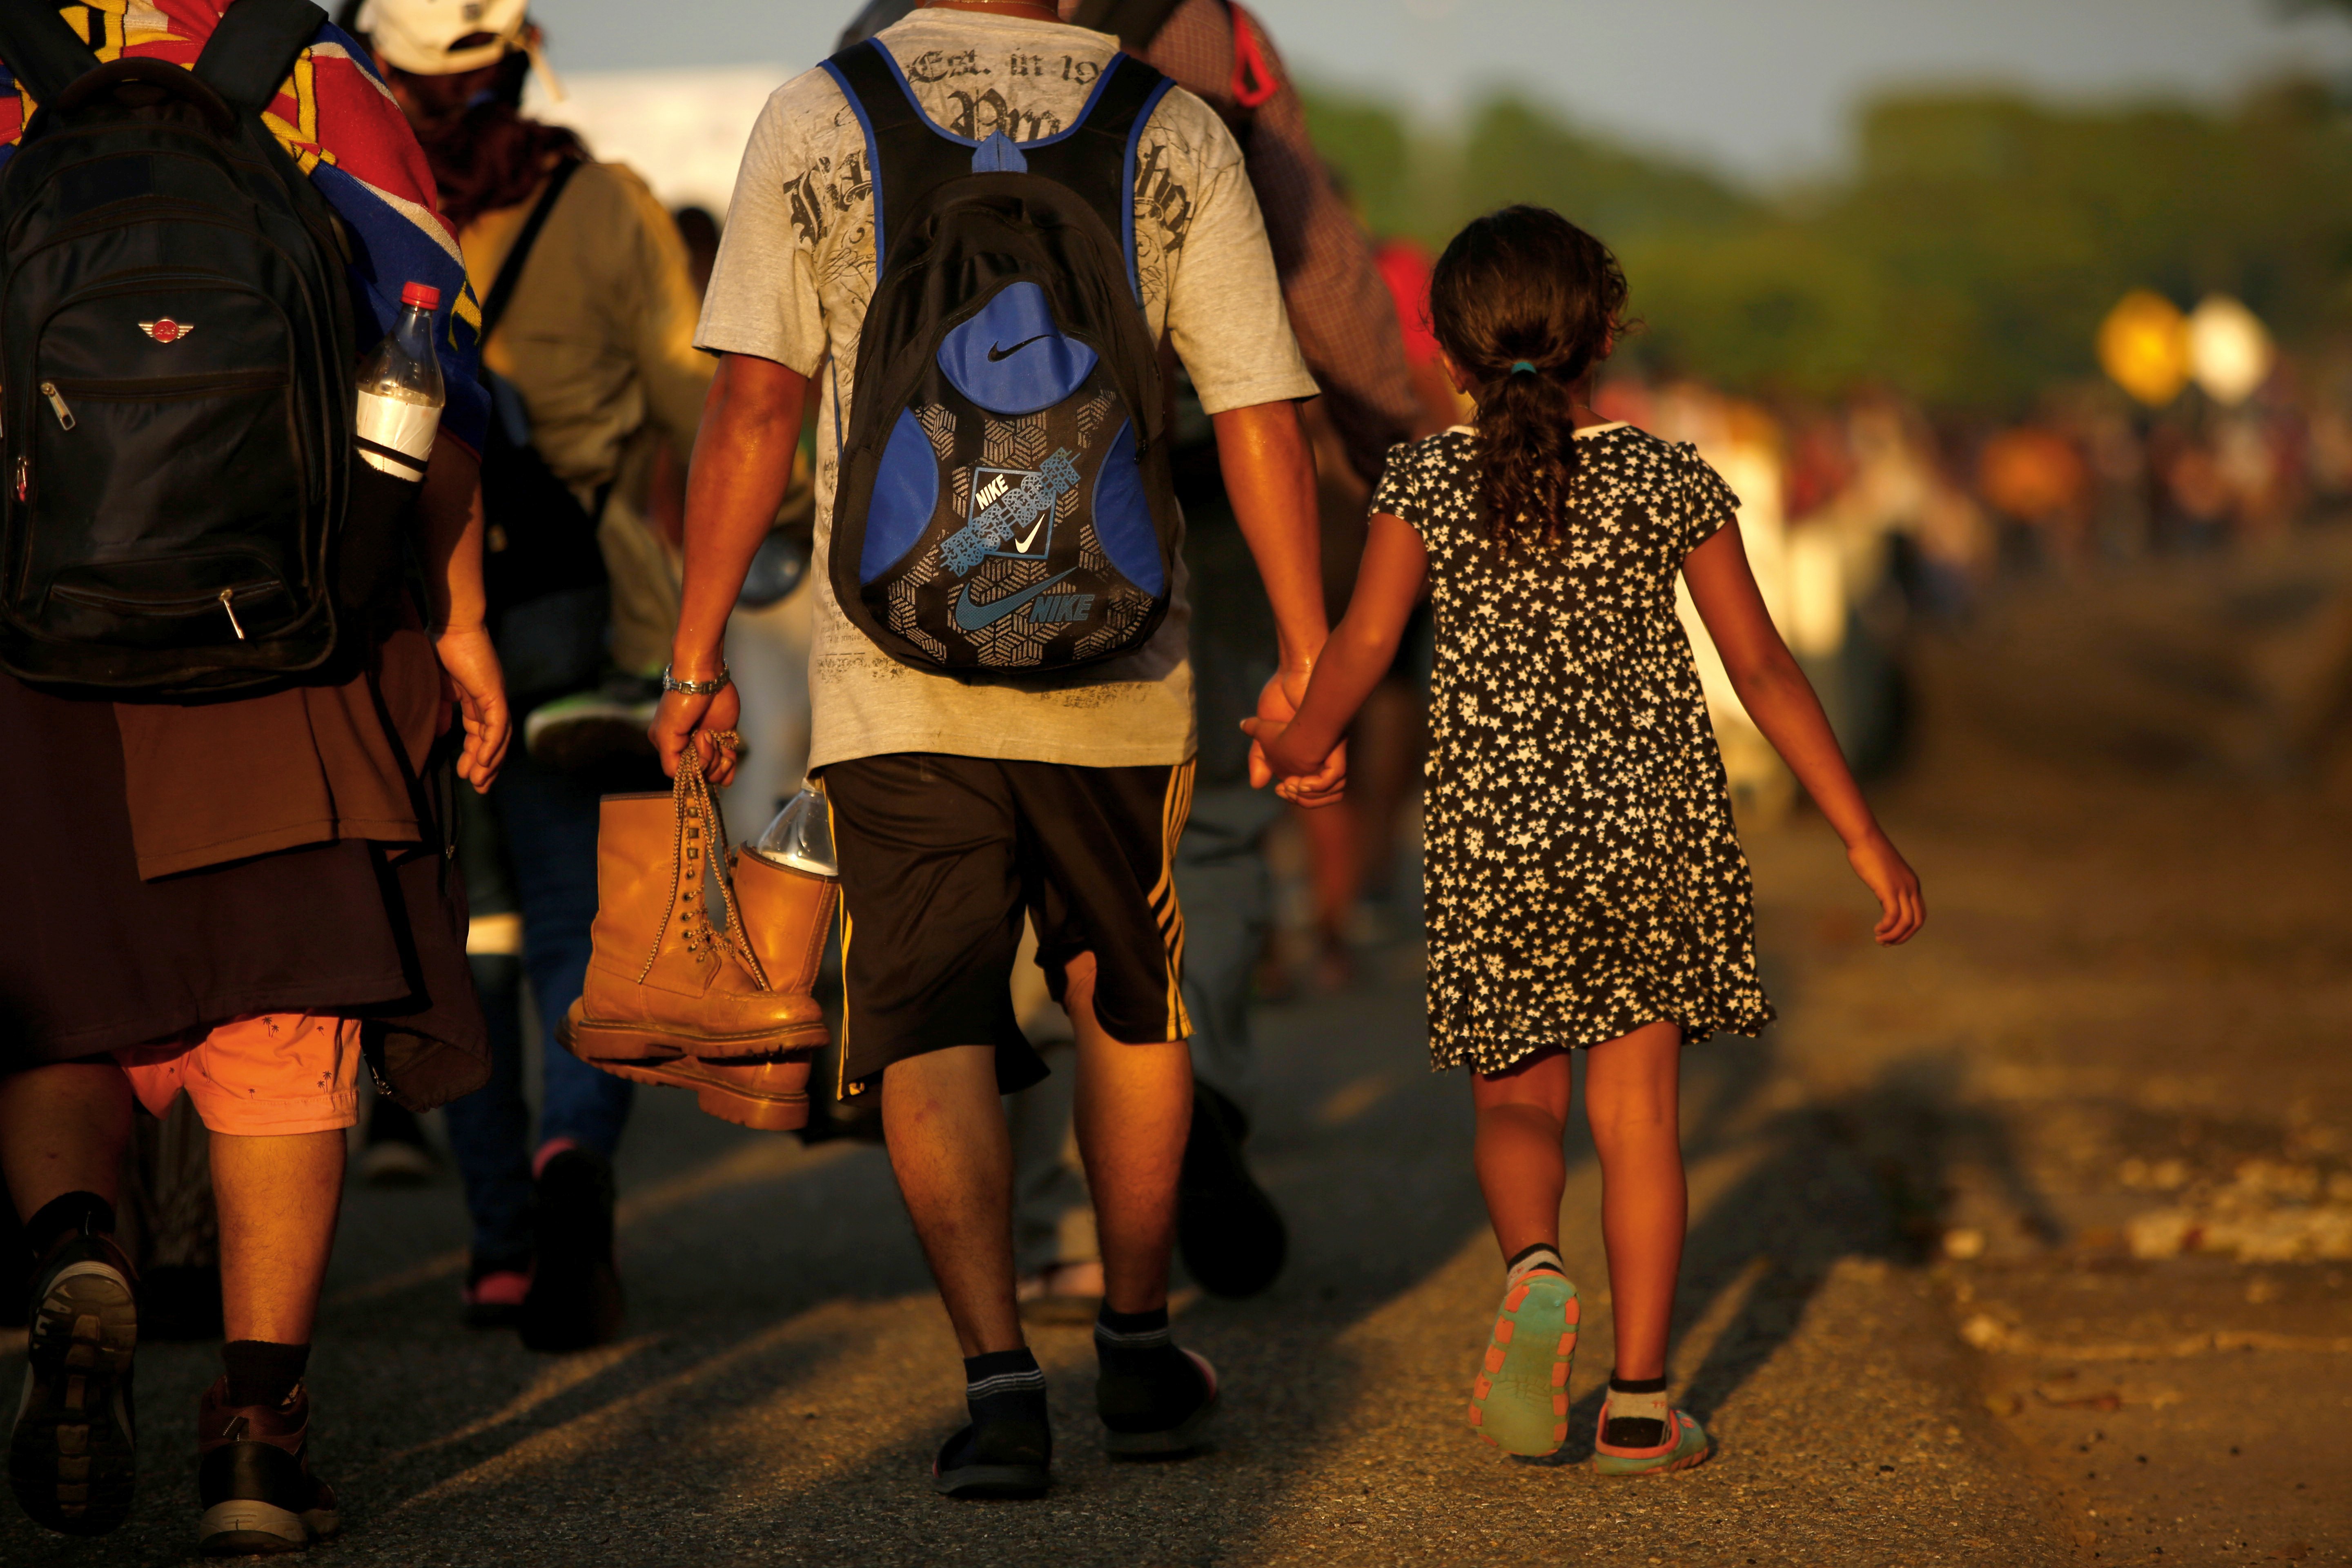 Jose Francisco from Honduras leads his 8-year-old daughter, Zuabelin, by the hand Nov. 22, 2021, as they took part in a caravan near Villa Mapastepec, Mexico, and headed to the U.S. border. (CNS photo/Jose Luis Gonzalez, Reuters)